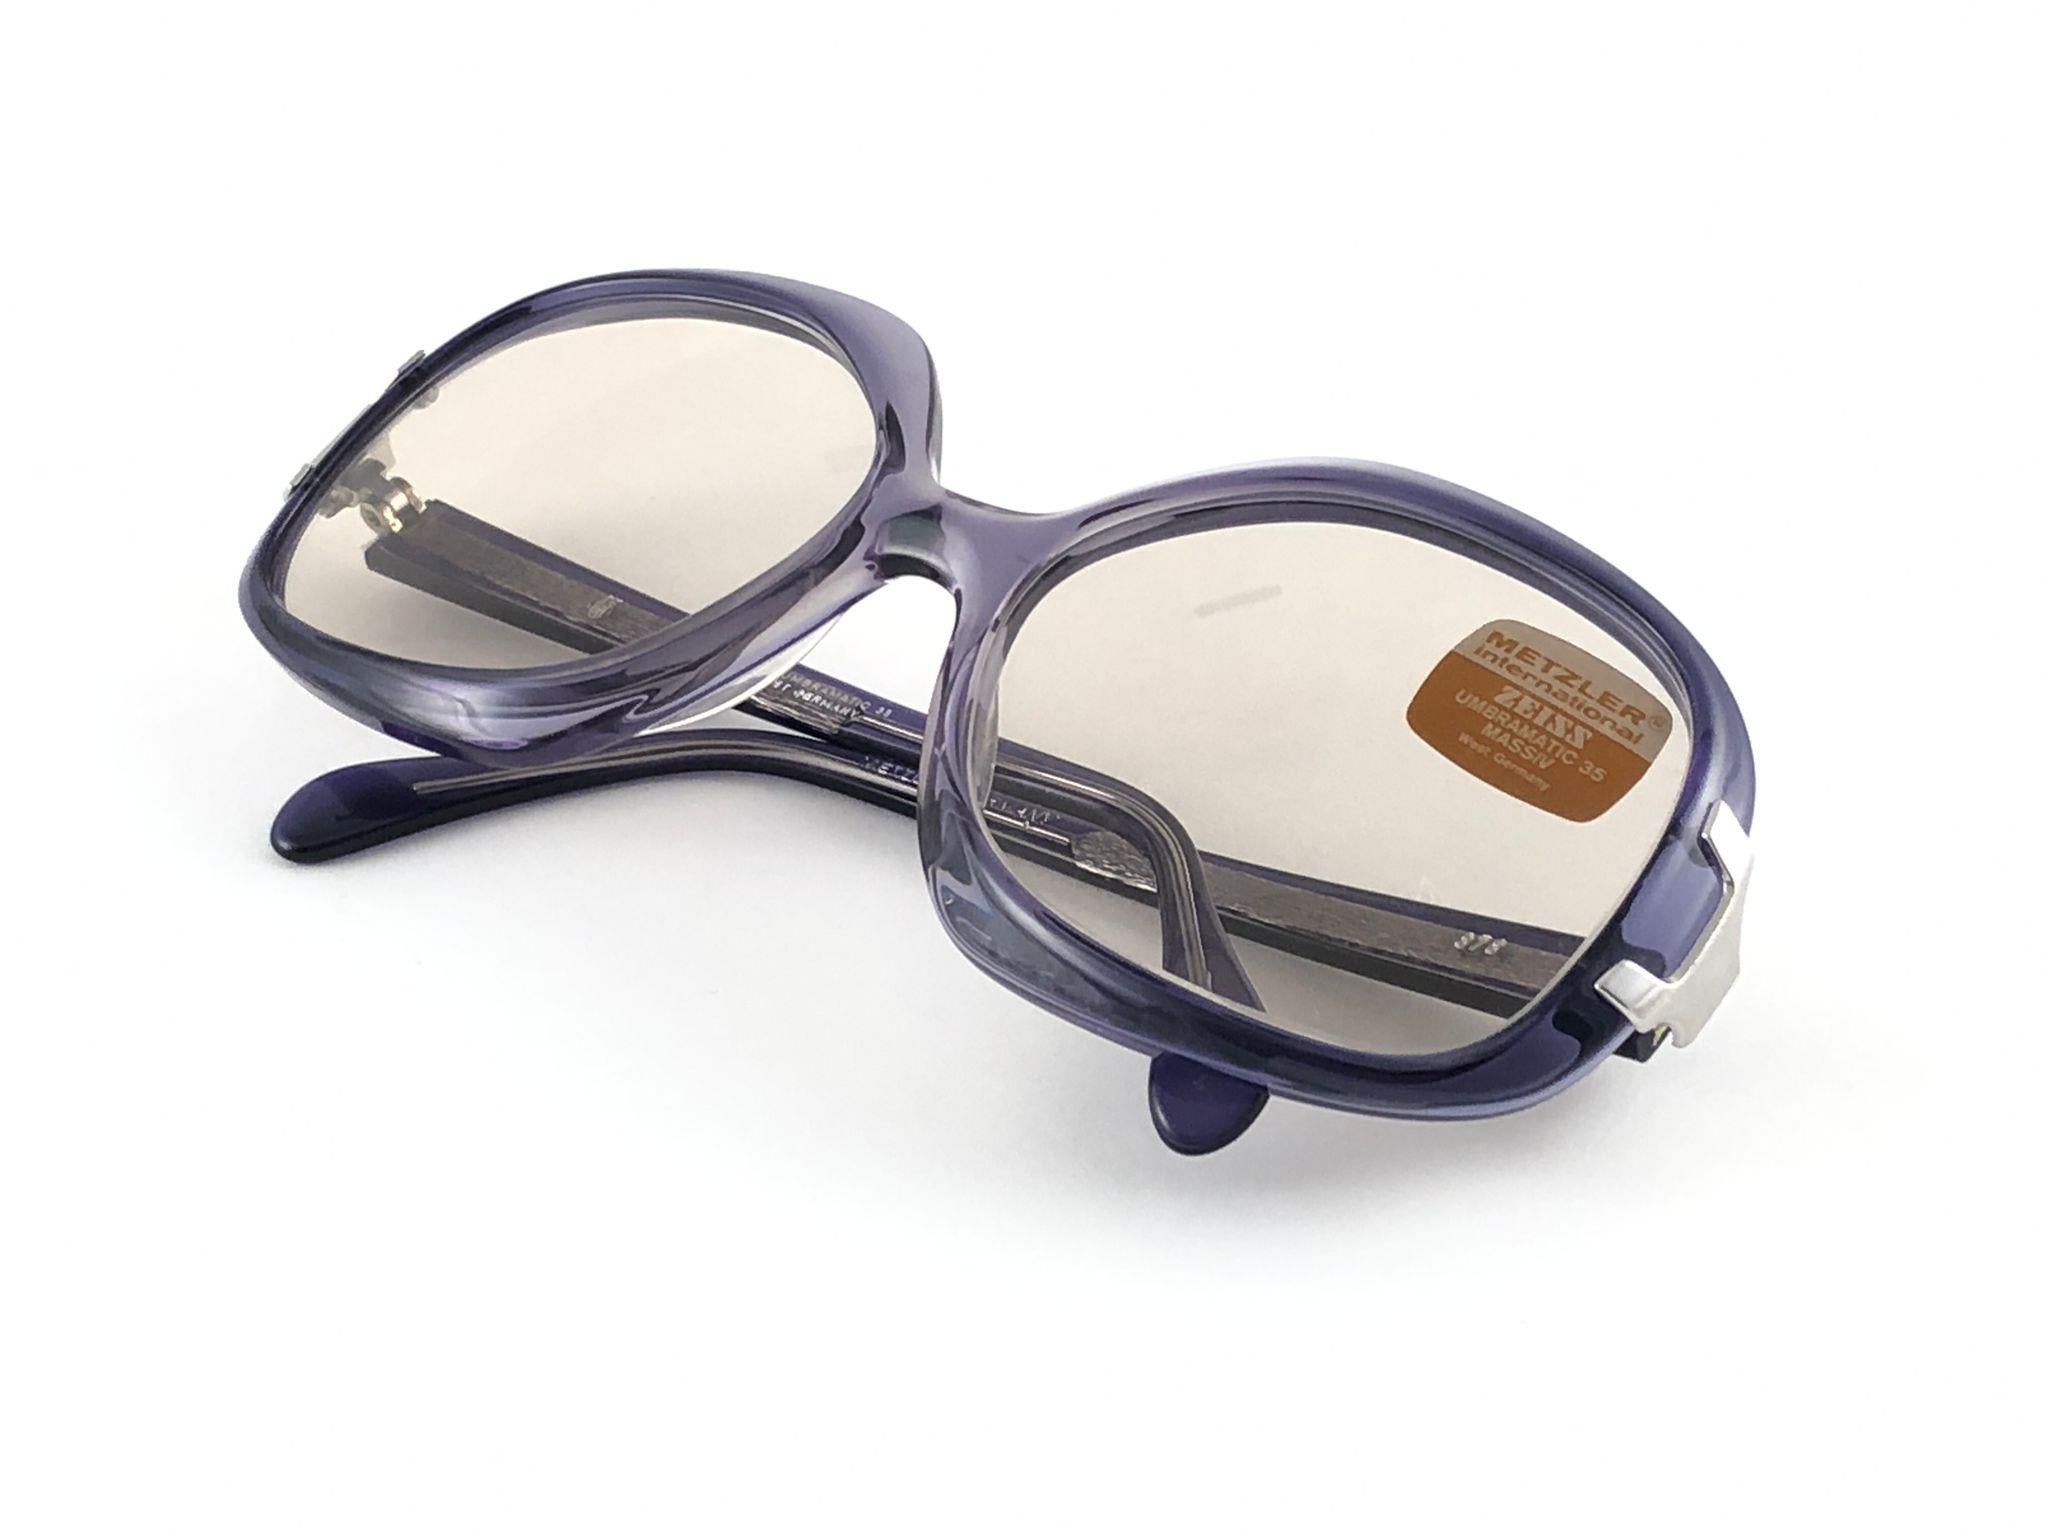 New Vintage Metzler 878 Translucent Purple Sunglasses Made in Germany 1980's For Sale 2